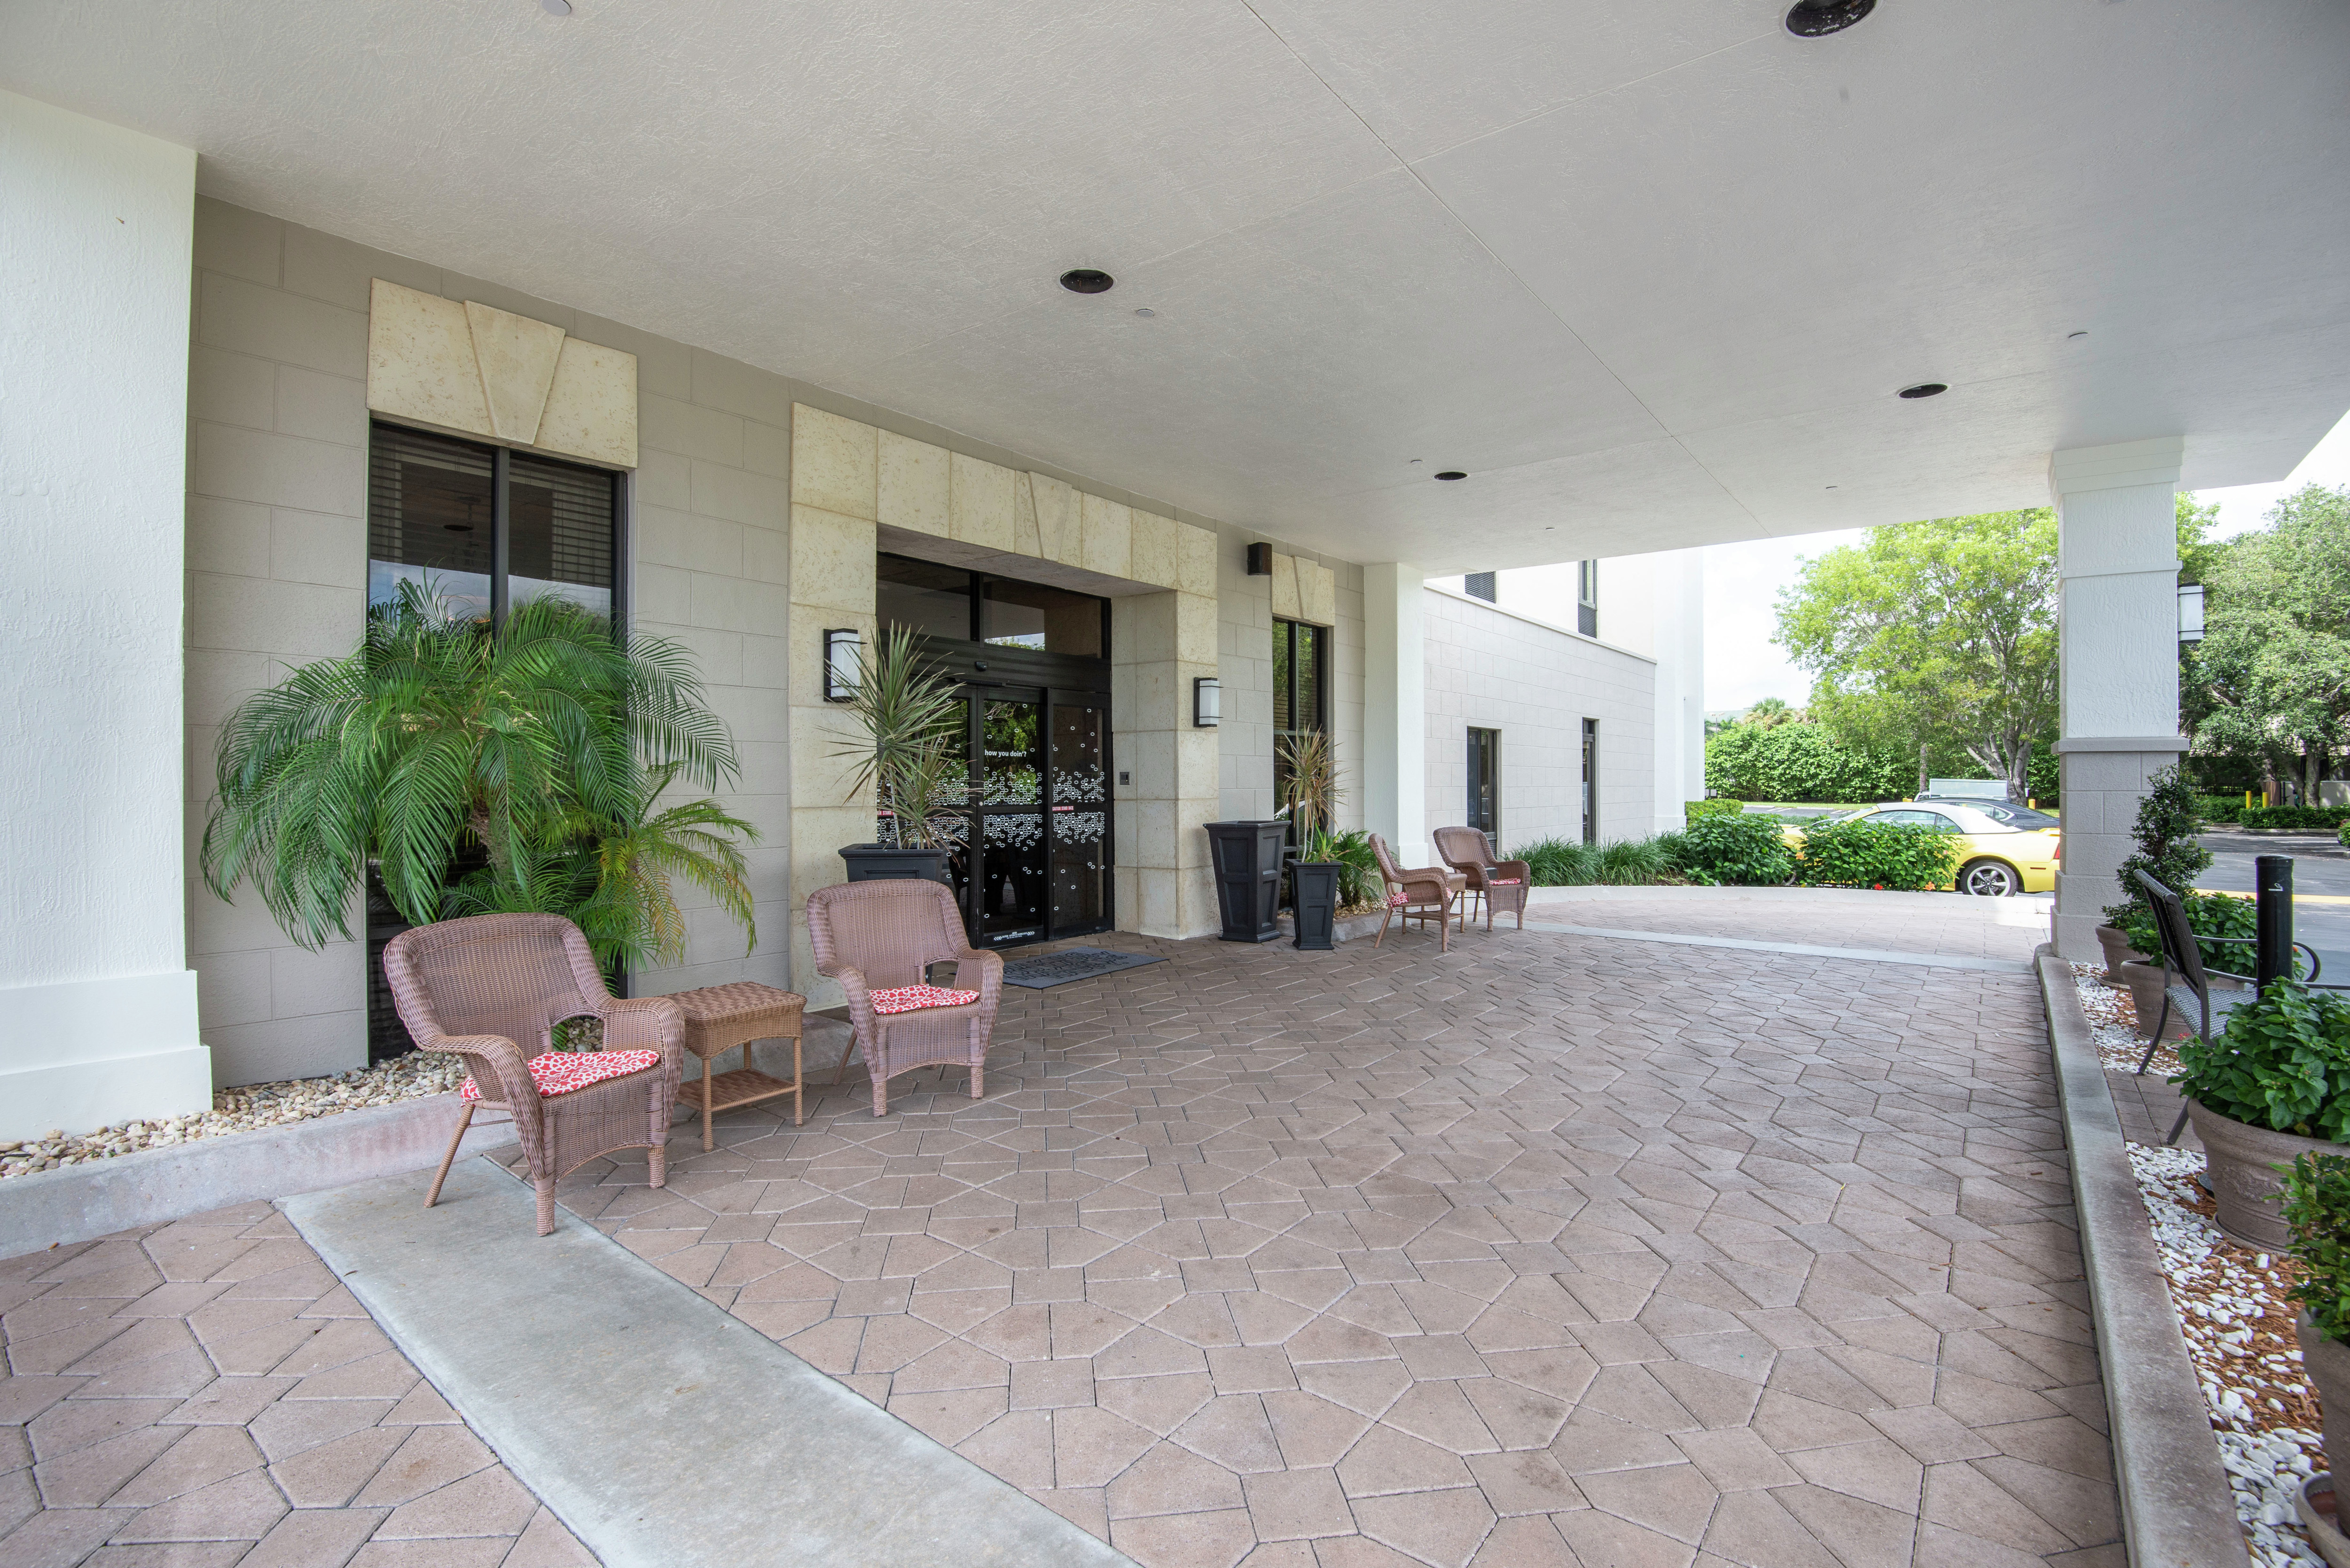 Hotel Exterior Entrance with Seating Area